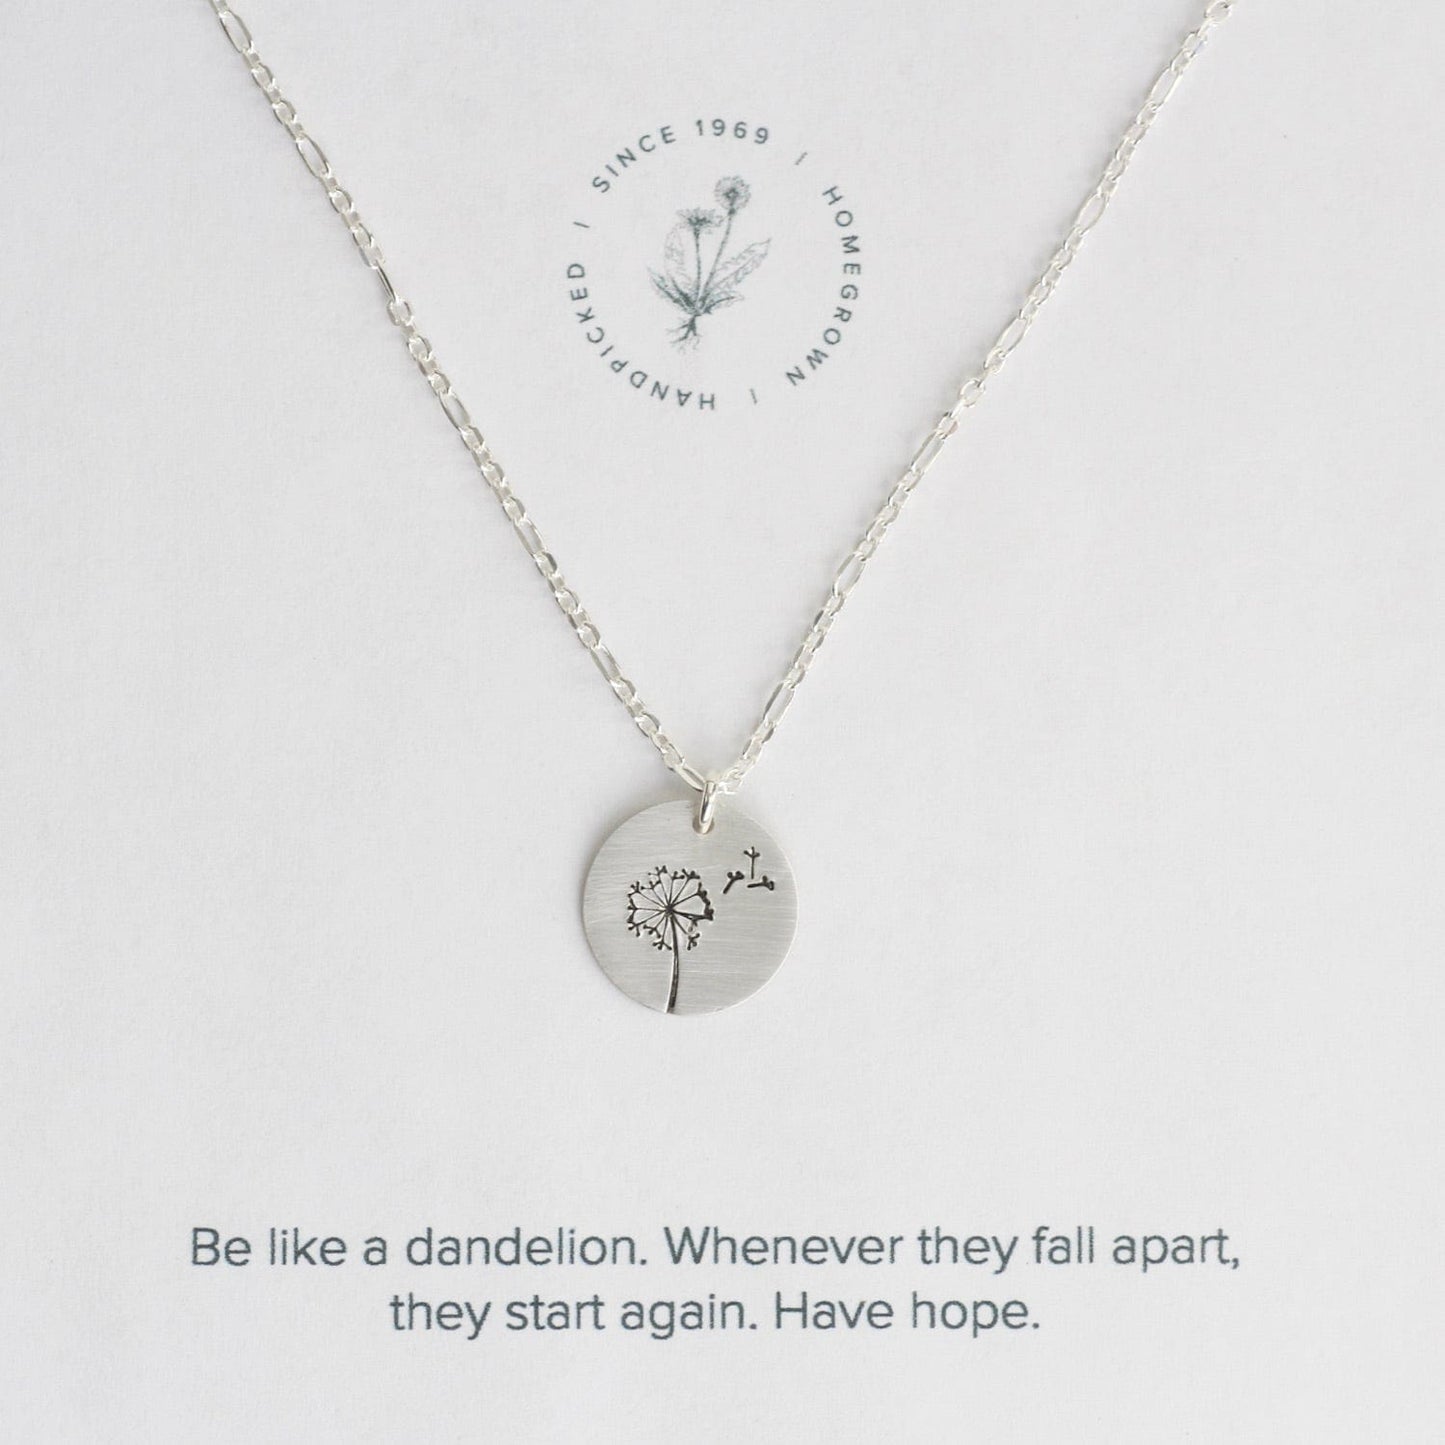 NKL-GF Small Hand Stamped Dandelion Charm Necklace in Sterling Silver